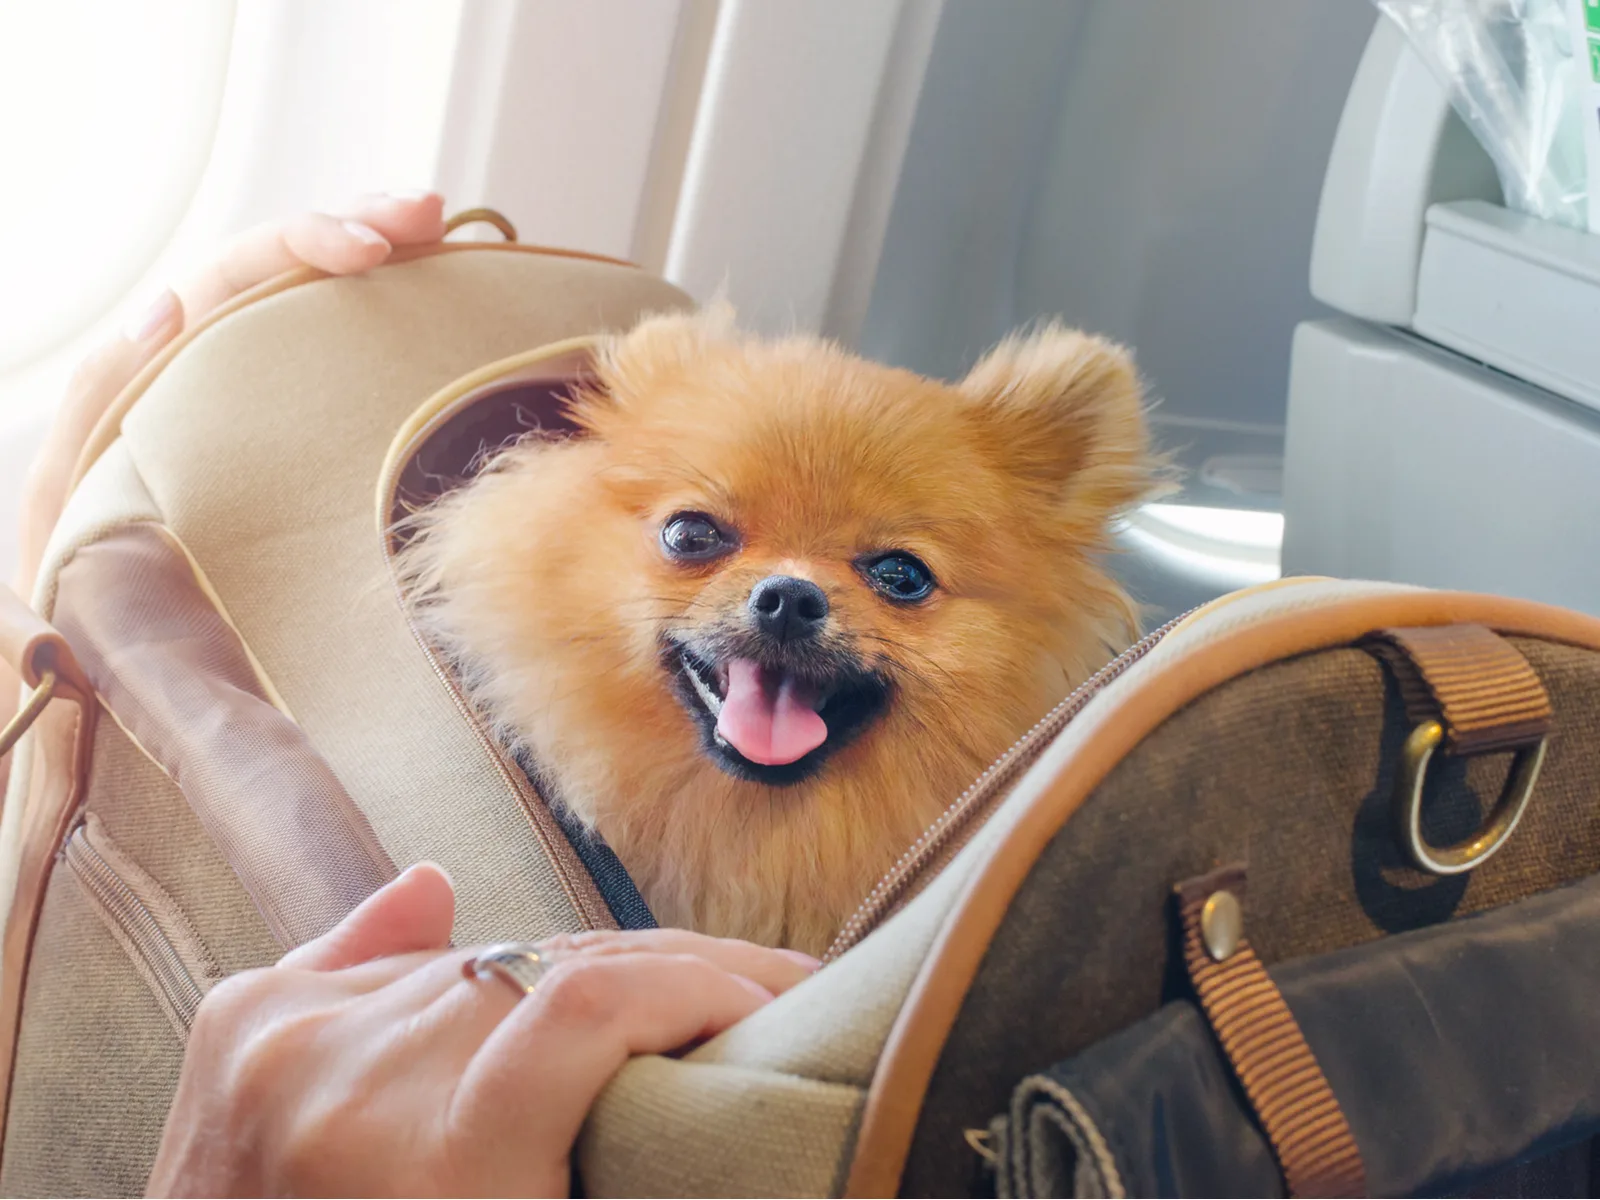 Pomaranian Spitz in a dog travel bag that's pretty fancy and has metal accents